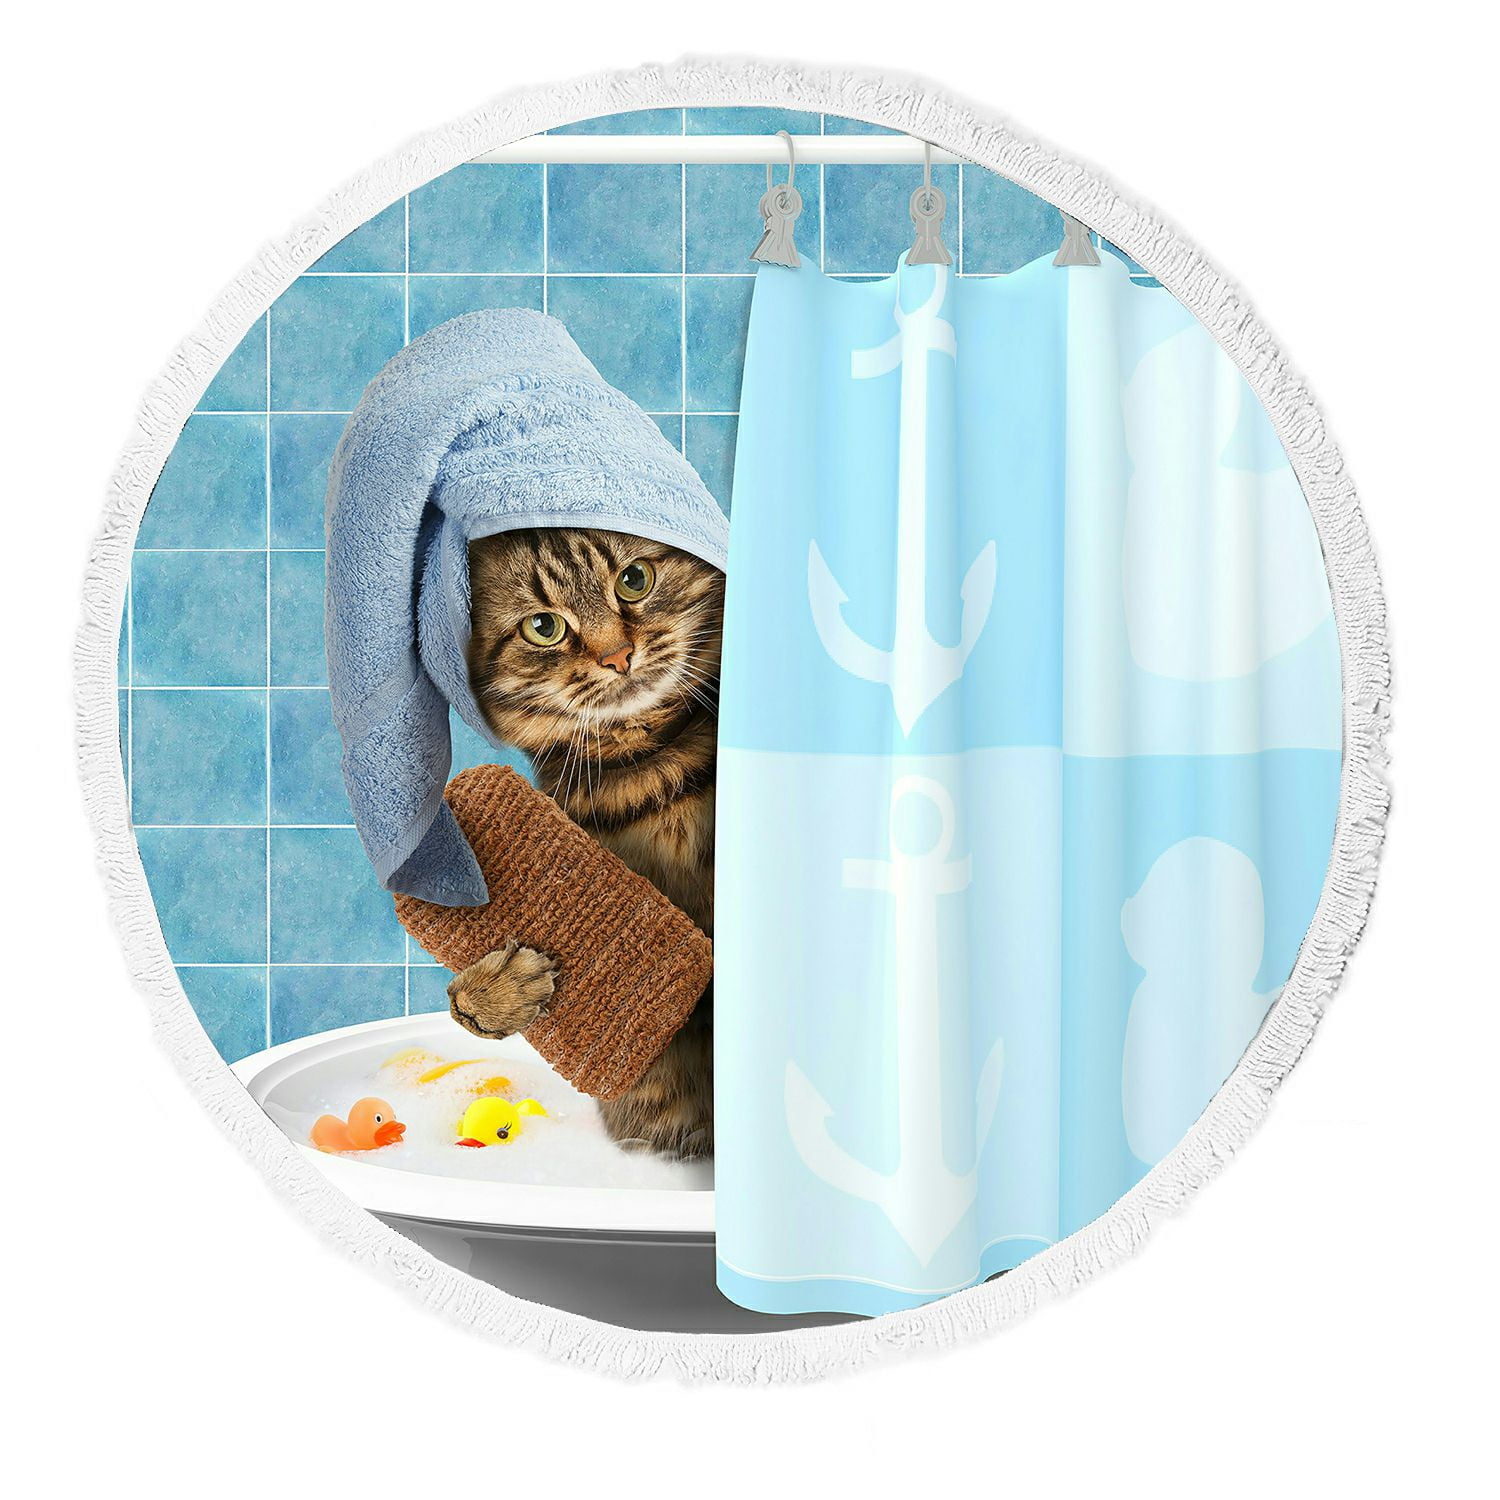 PKQWTM Funny cat is taking a bath with toy duck Blanket Crystal Velvet